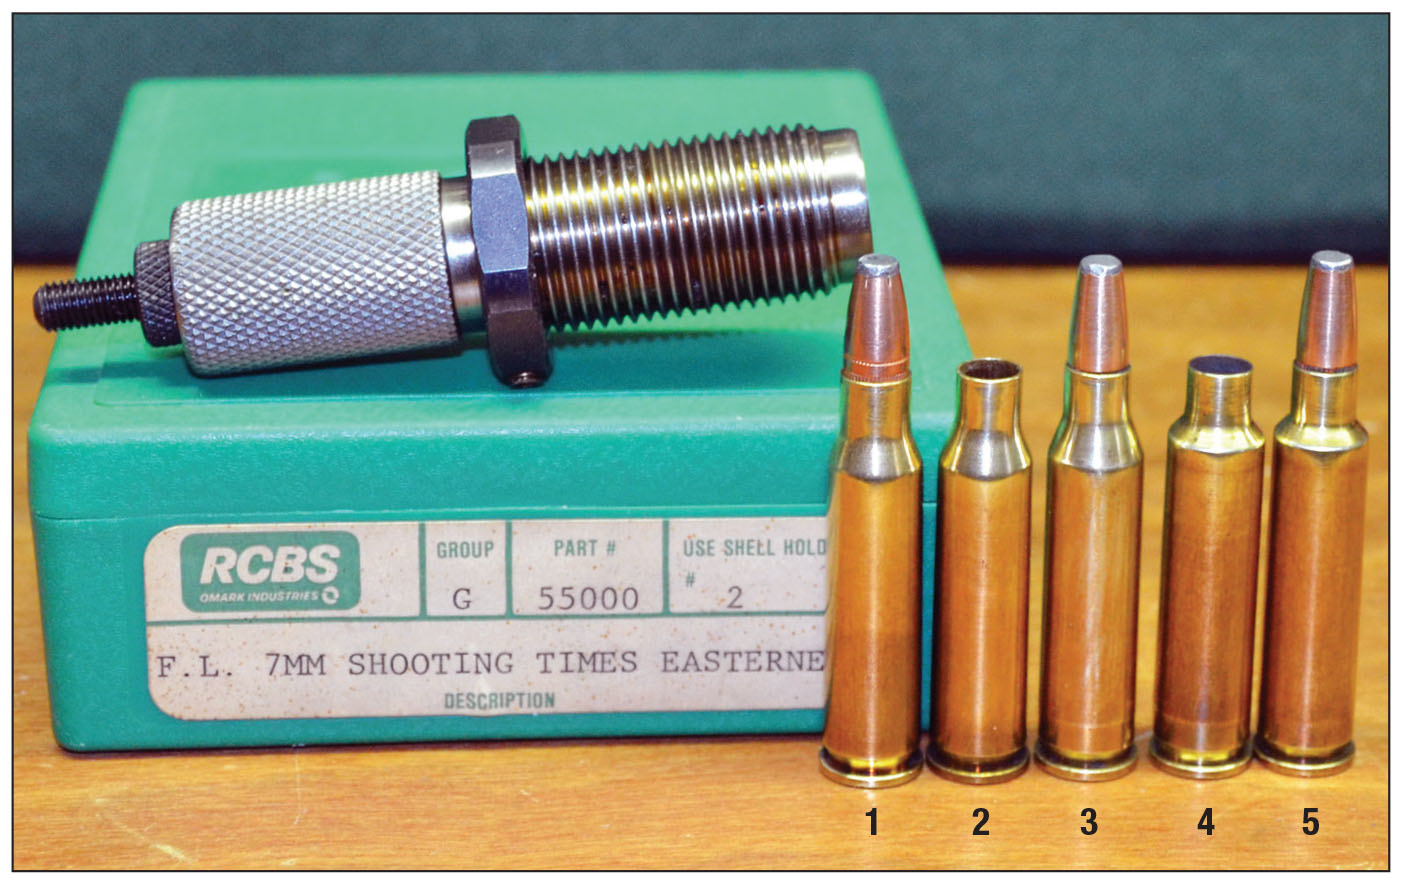 The 7mm STE case is easily formed by necking down the .307 Winchester case and fireforming: (1) .307 Winchester cartridge, (2) .307 Winchester case necked down, (3) case loaded for fireforming, (4) fireformed case and (5) loaded 7mm STE round.